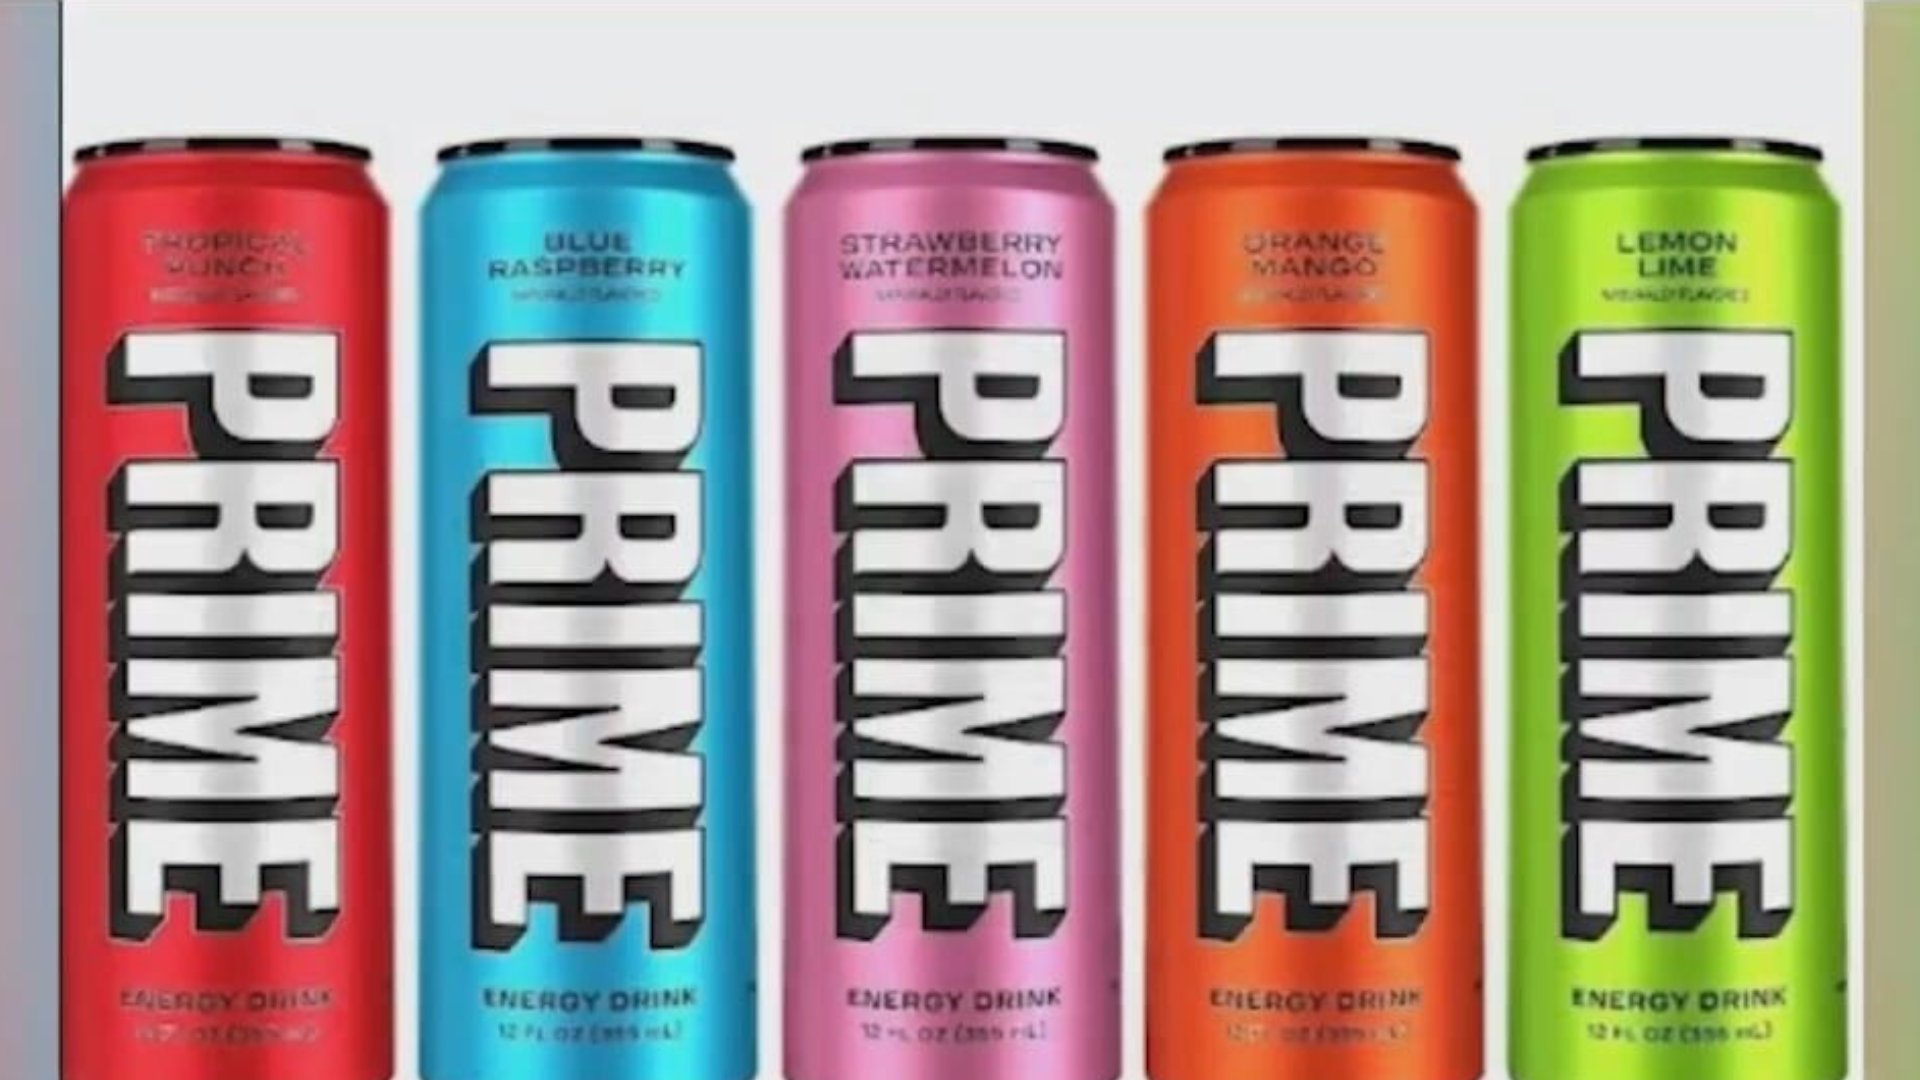 Logan Paul's PRIME energy drink puts kids' hearts at risk: experts